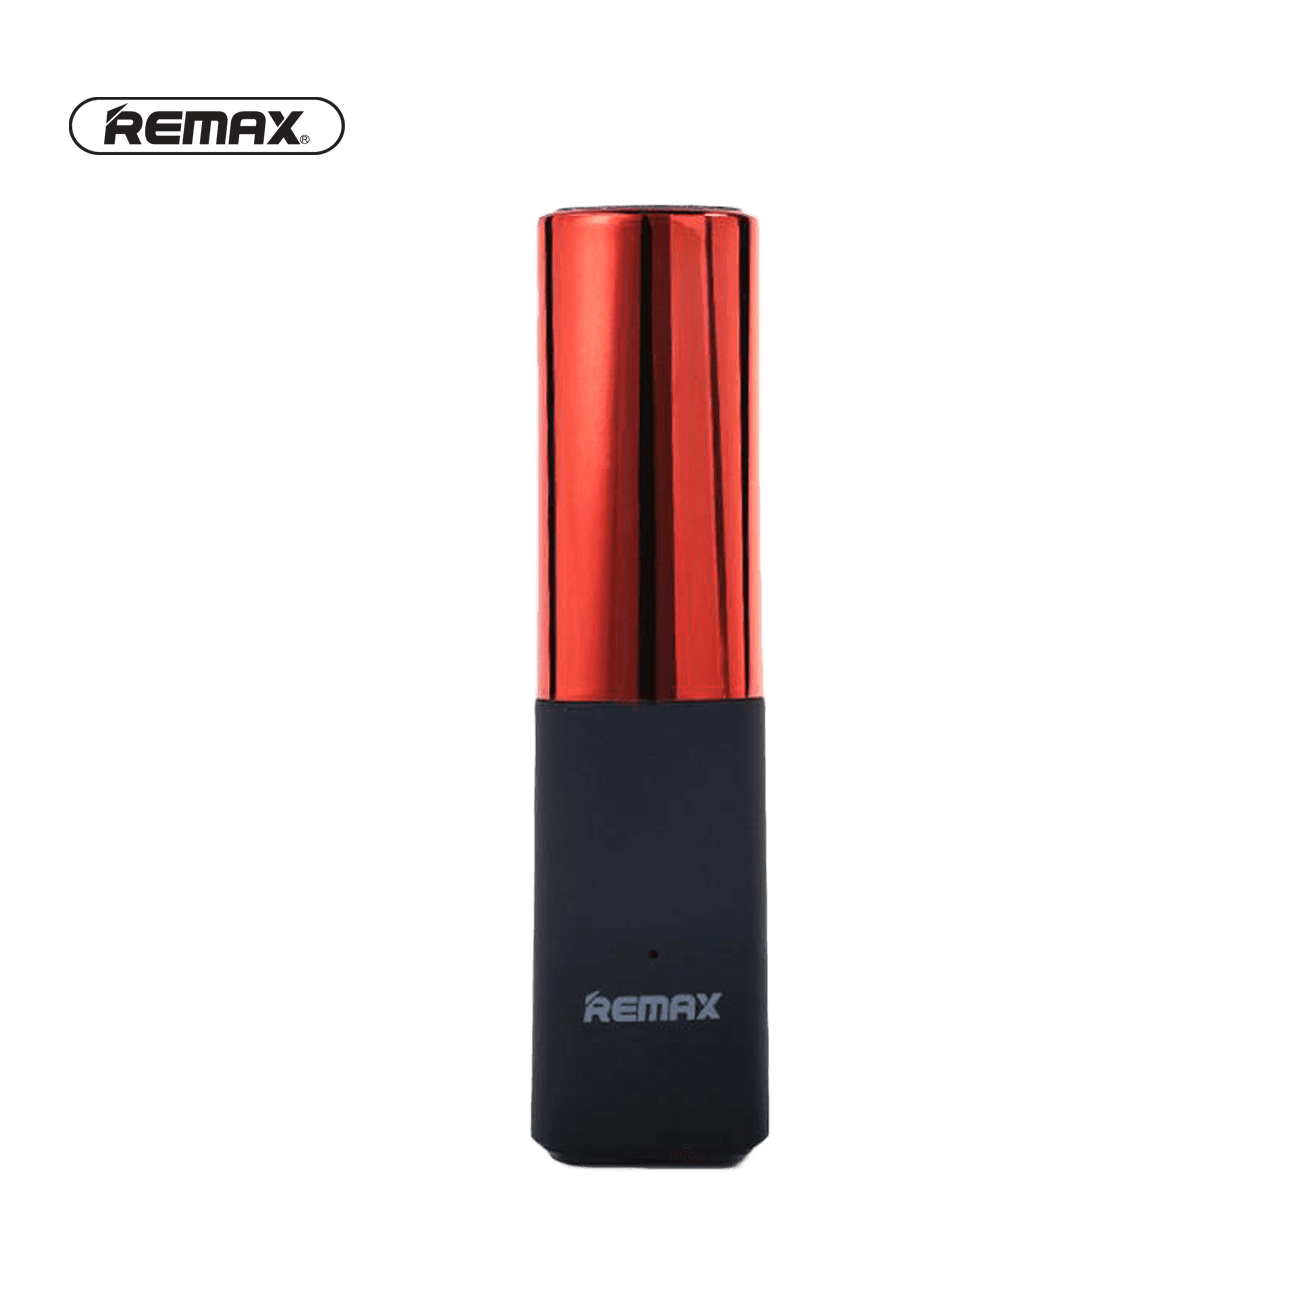 Selected image for Преносна мобилна Батерија remax rpl 12 2400 mah red